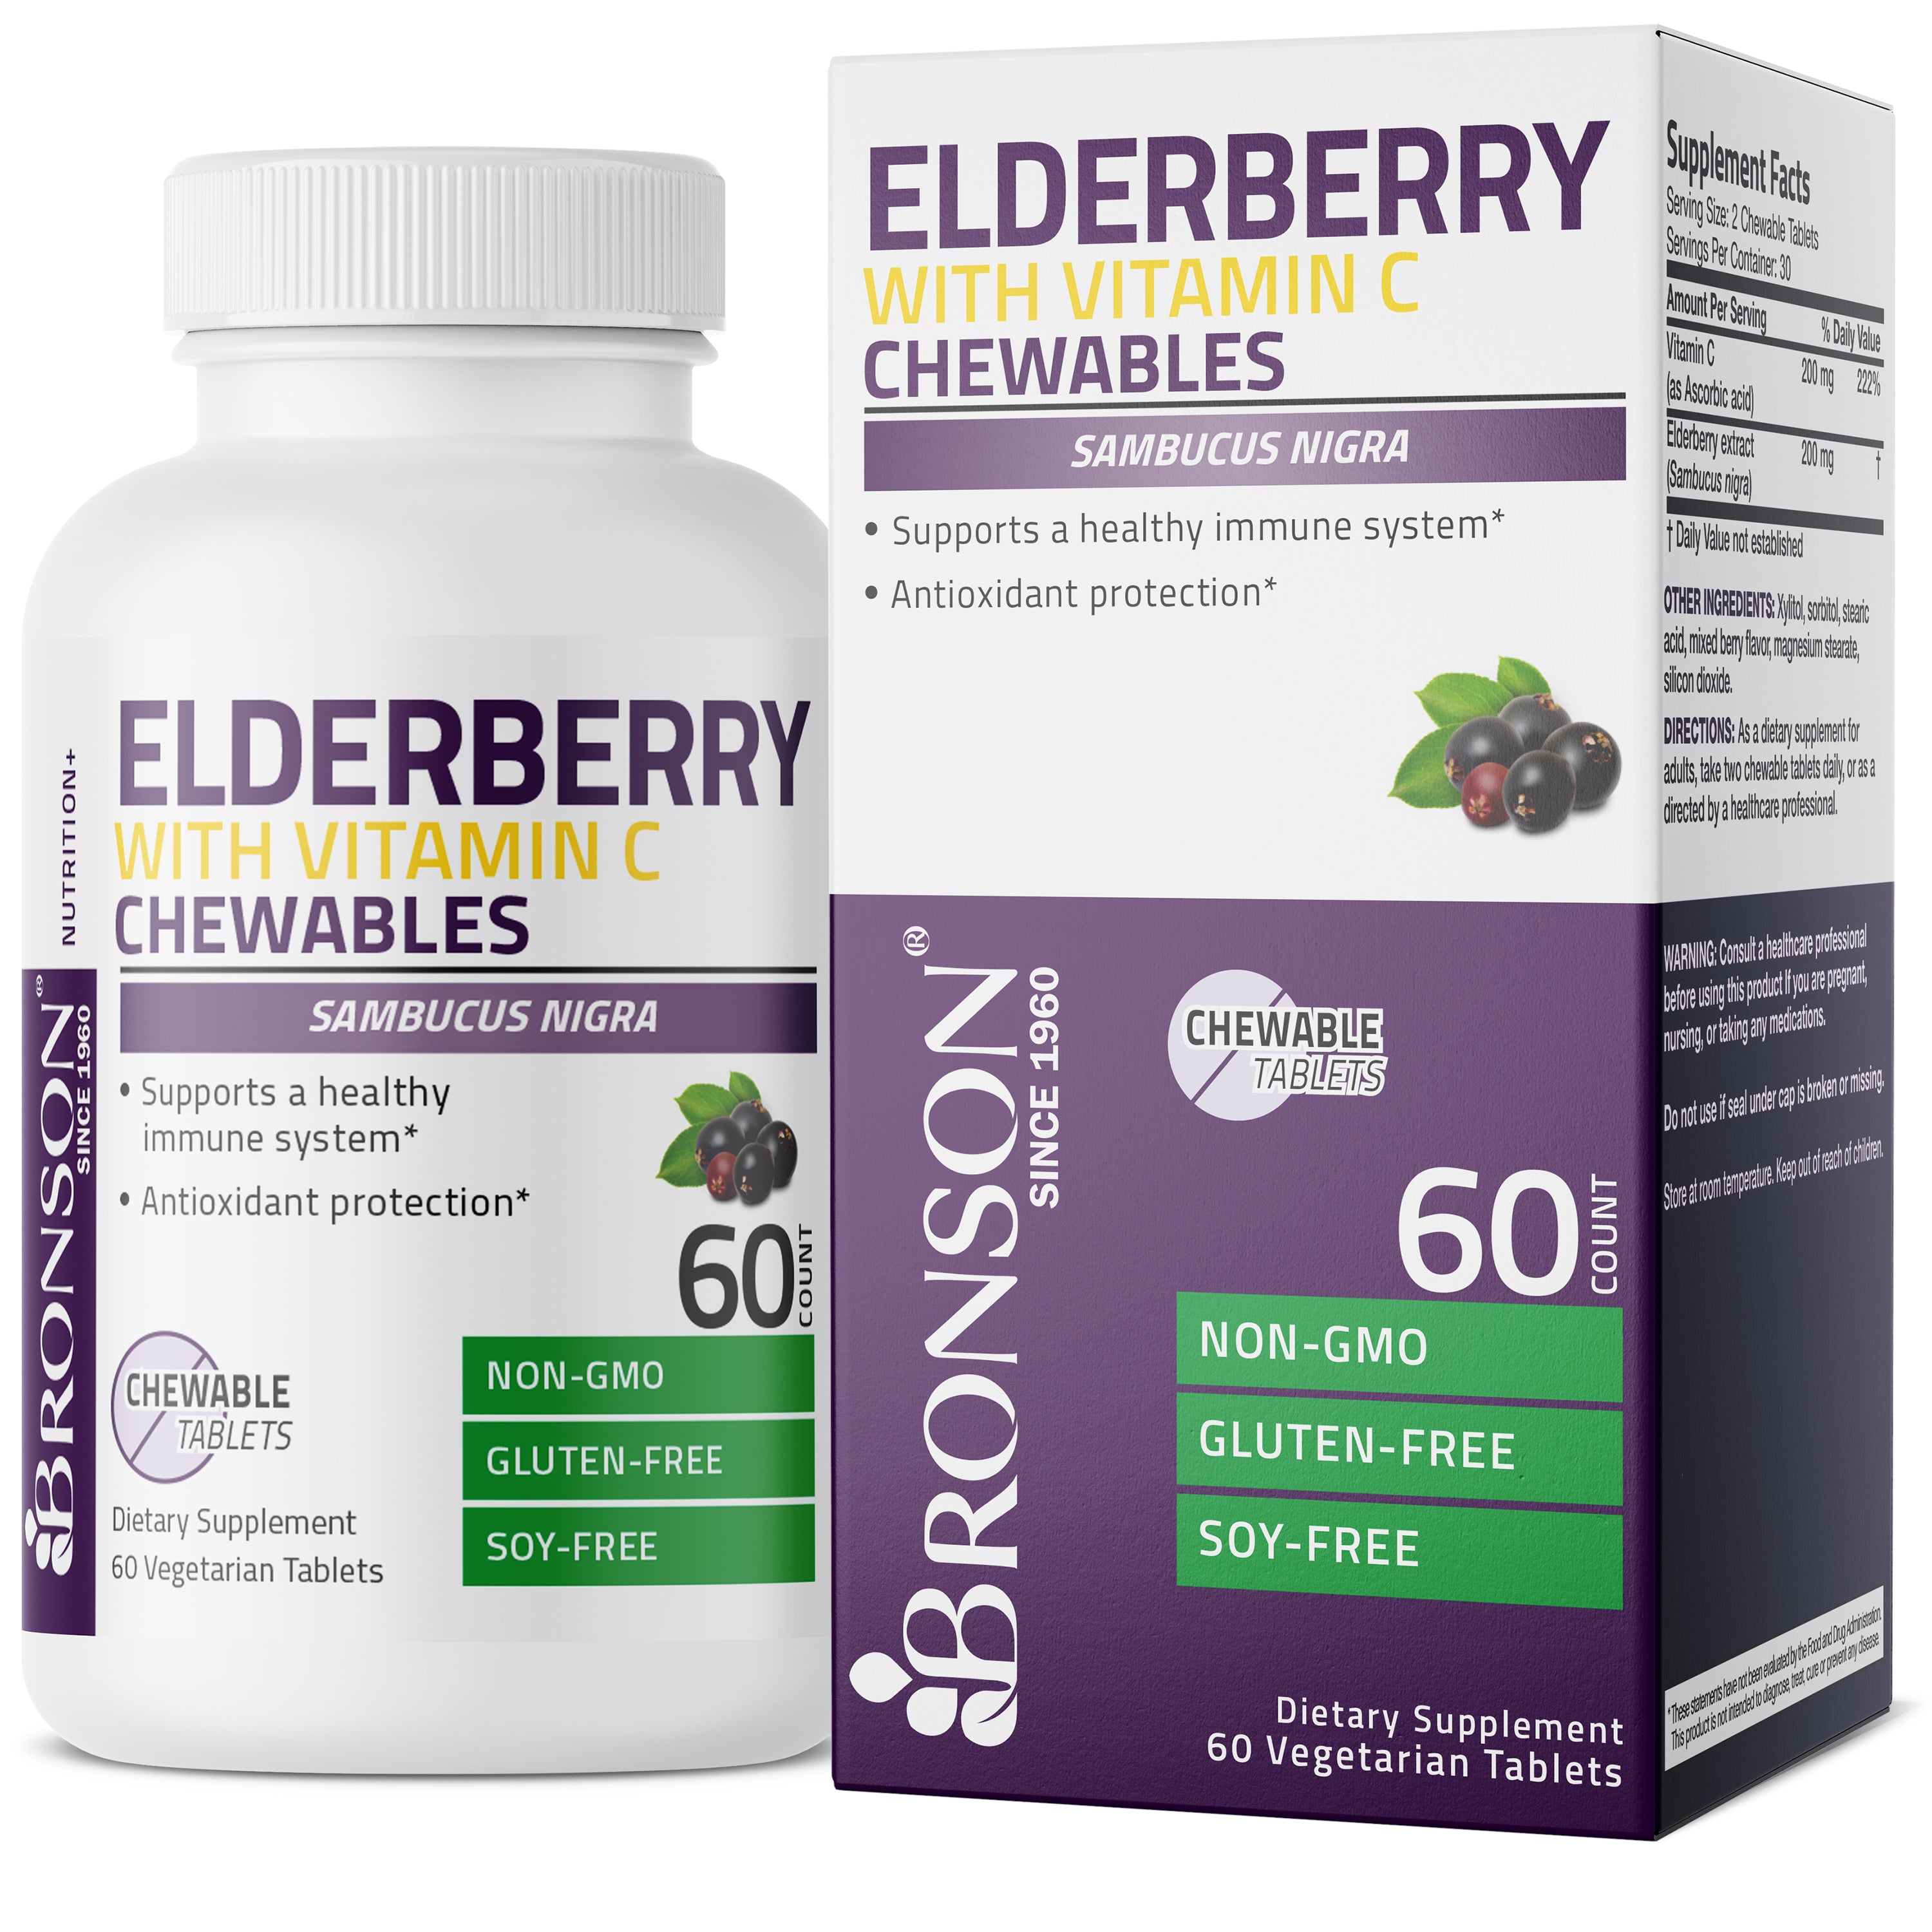 Elderberry Chewables with Vitamin C - Berry - 60 Vegetarian Tablets view 1 of 5